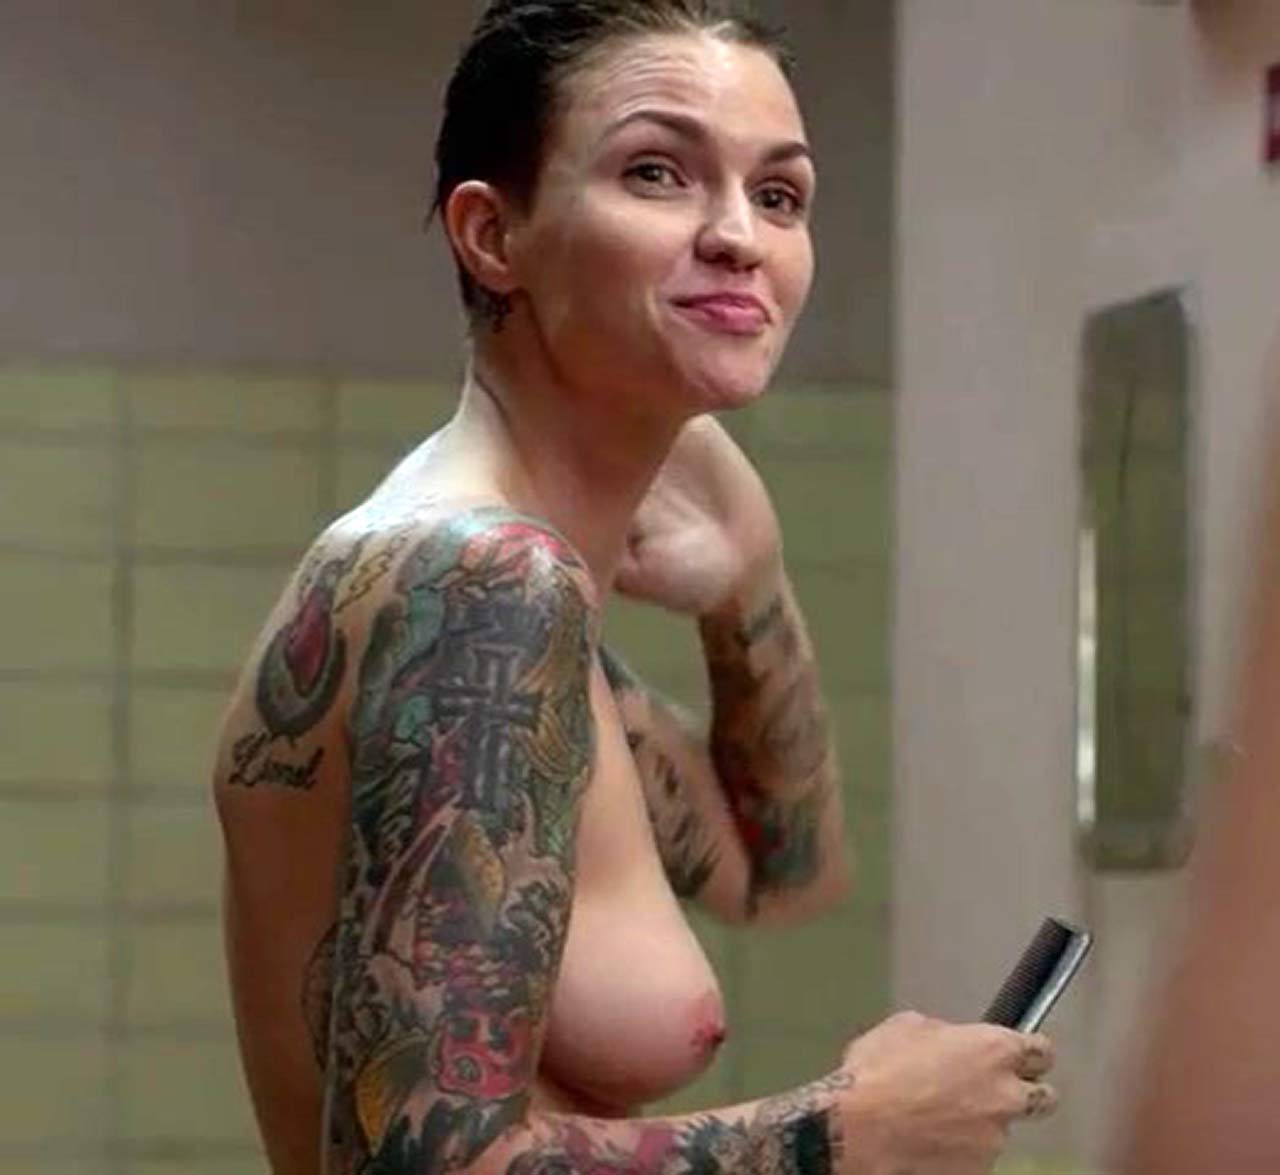 Ruby rose fucked the pic